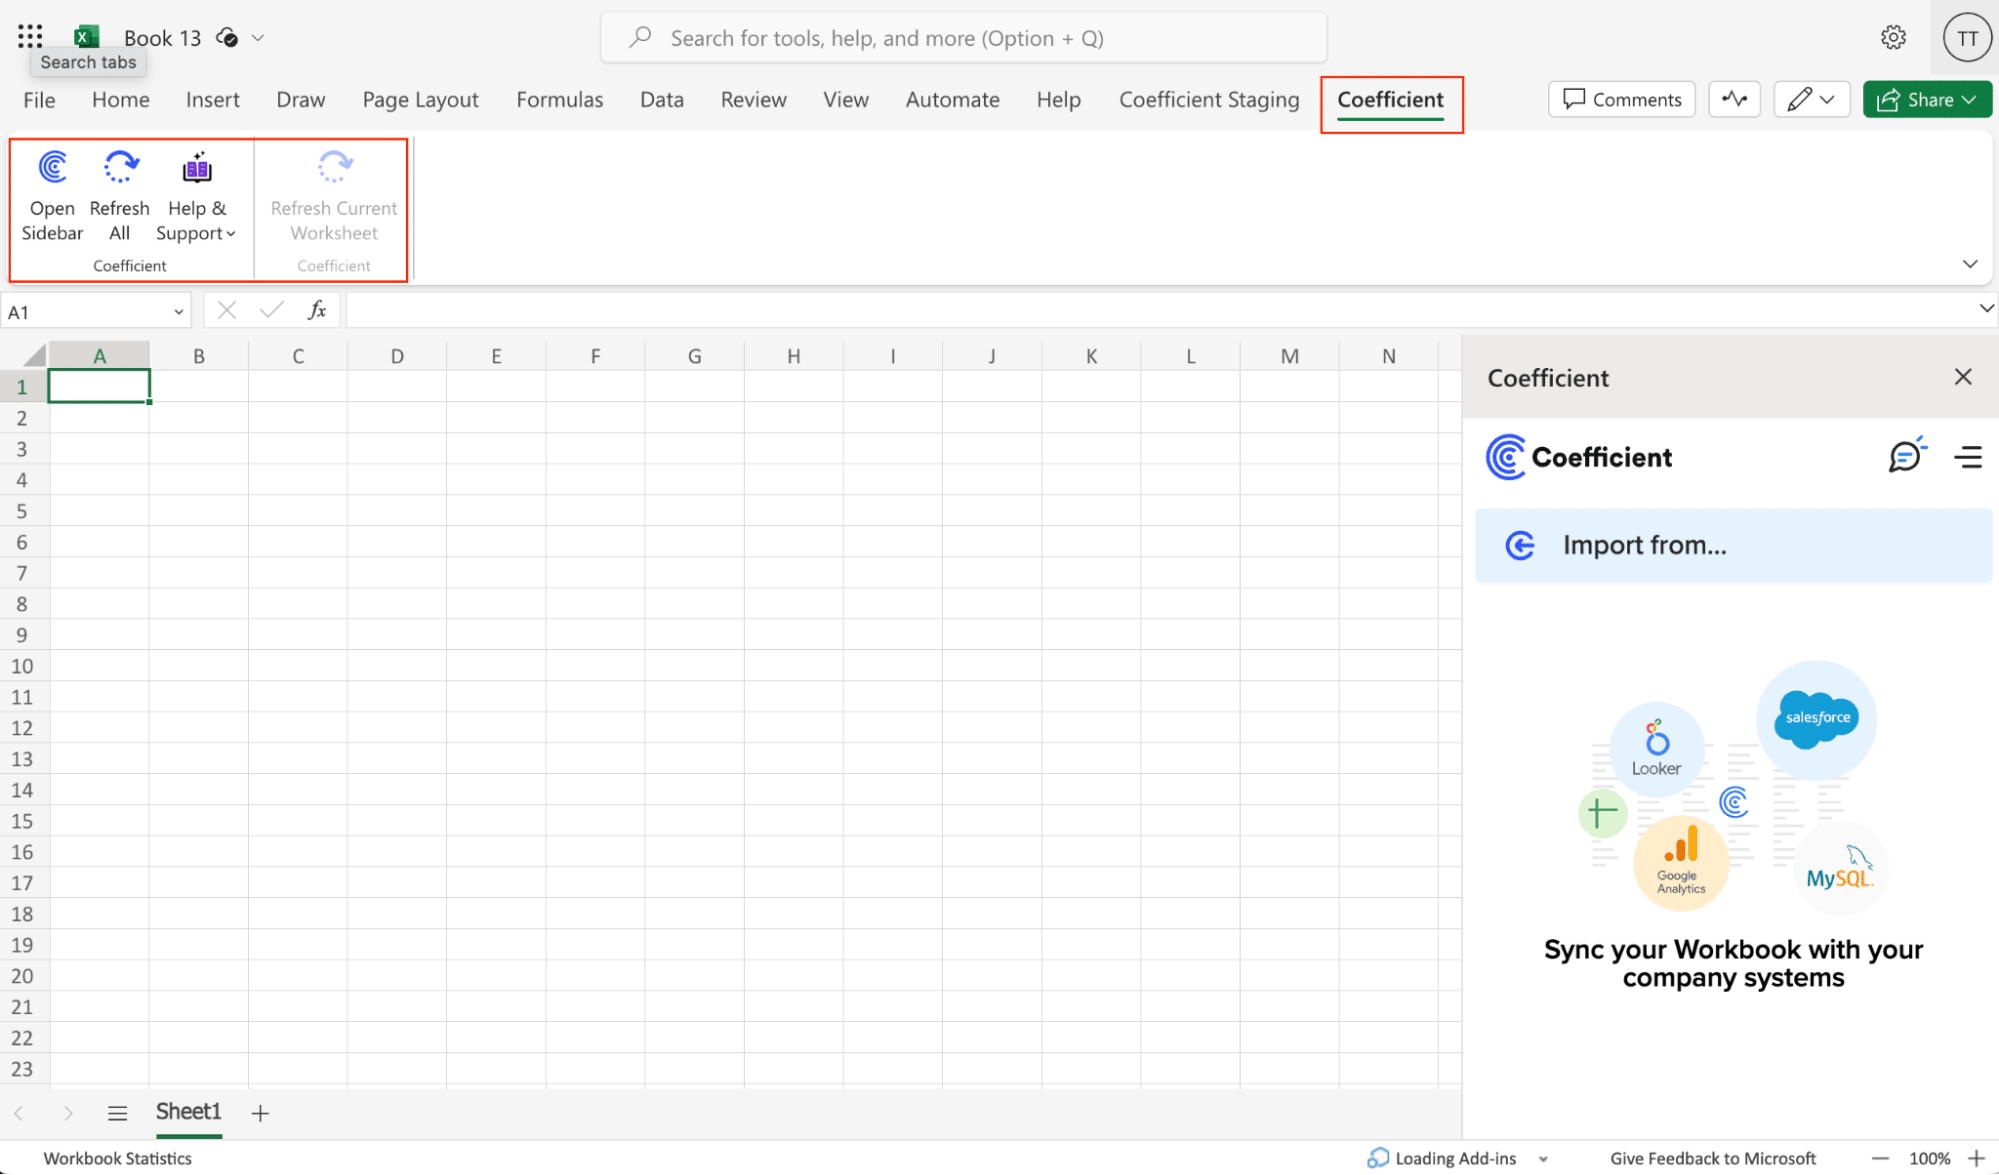 Coefficient tab displayed on Excel’s top navigation bar after installation